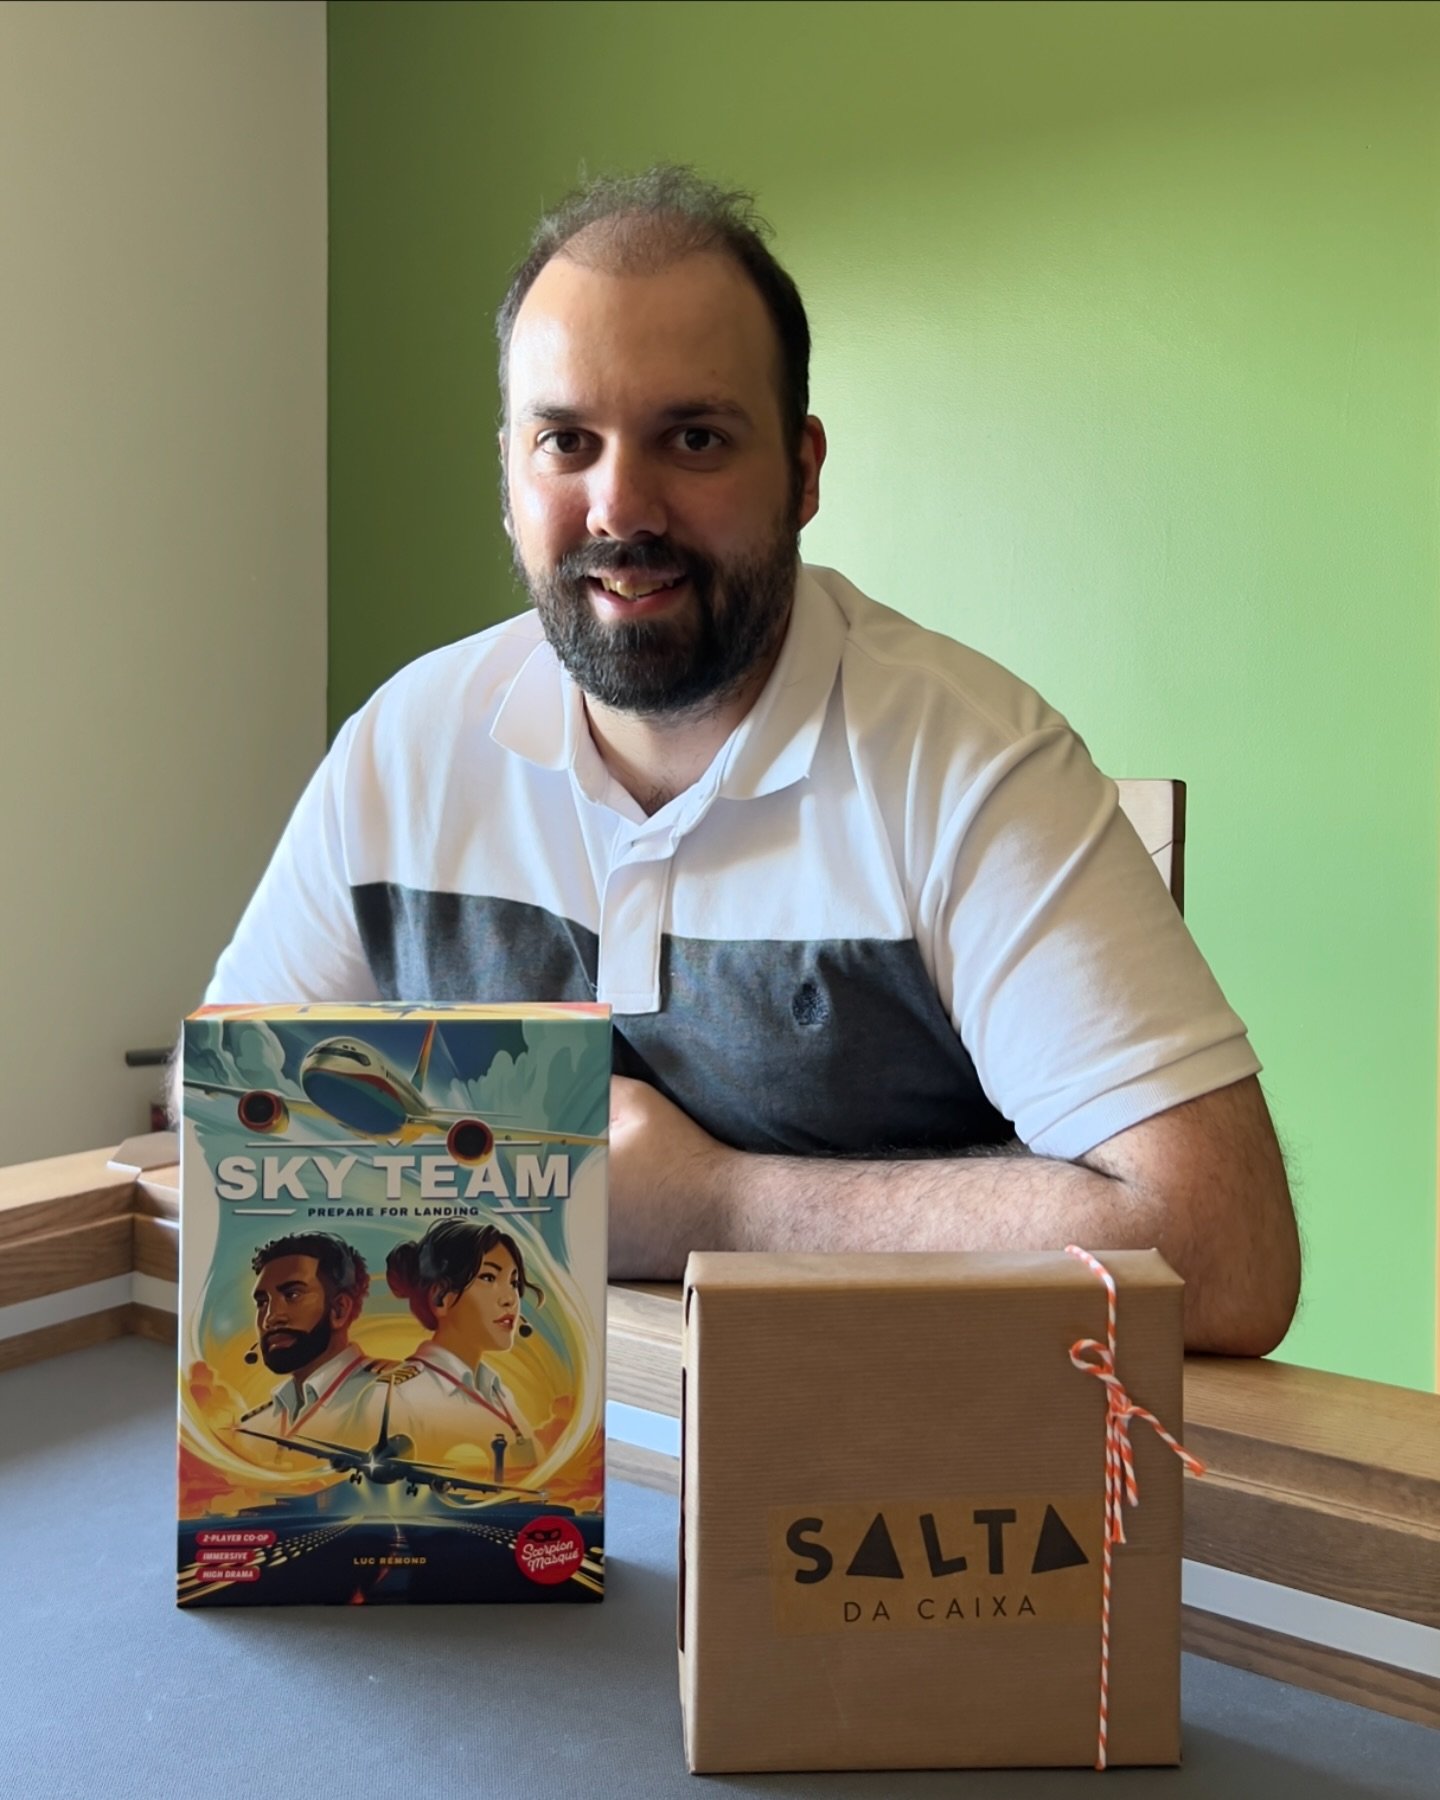 🇵🇹⬇️//🇬🇧 Today it is Hugo&rsquo;s (also known as Red Meeple) 33rd birthday, wohooo! 🥳
.
As a gift, Hugo bought Sky Team and Rita requested for a little gift that was wrapped secretly by @salta_da_caixa&hellip; 🤭
.
Can you guess which game is wr